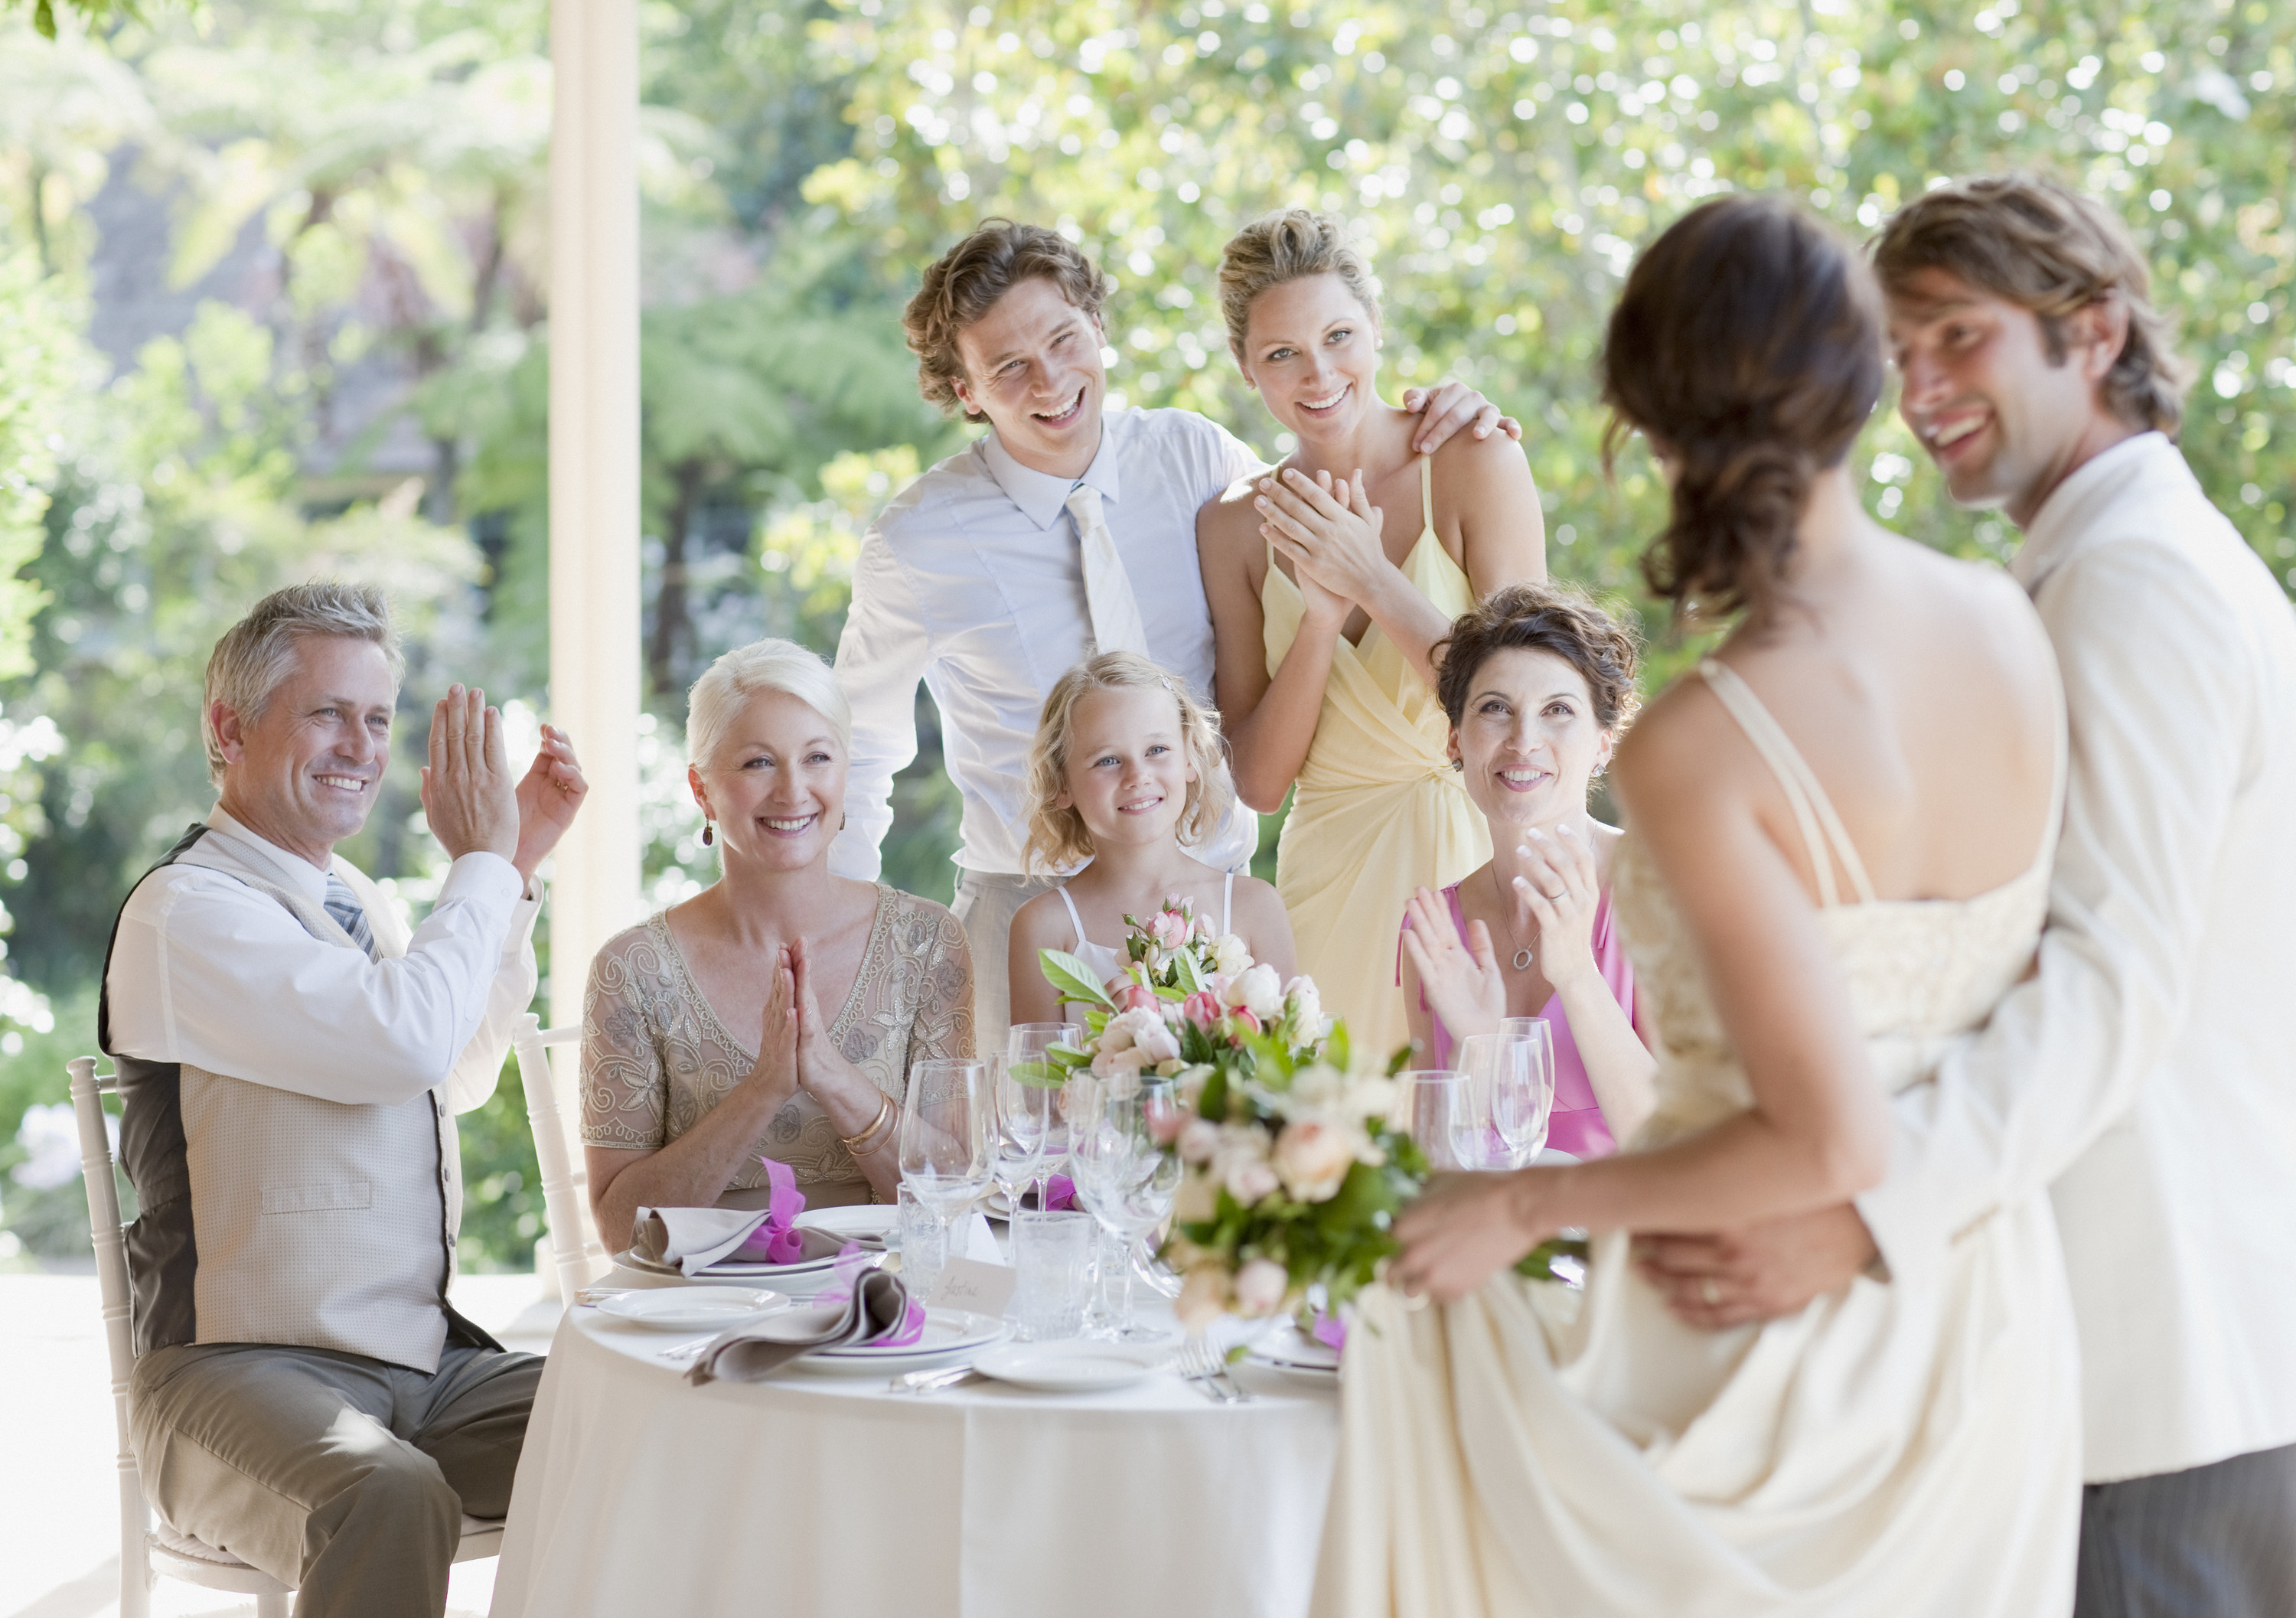 Wedding guests clap for the bride and groom at their reception